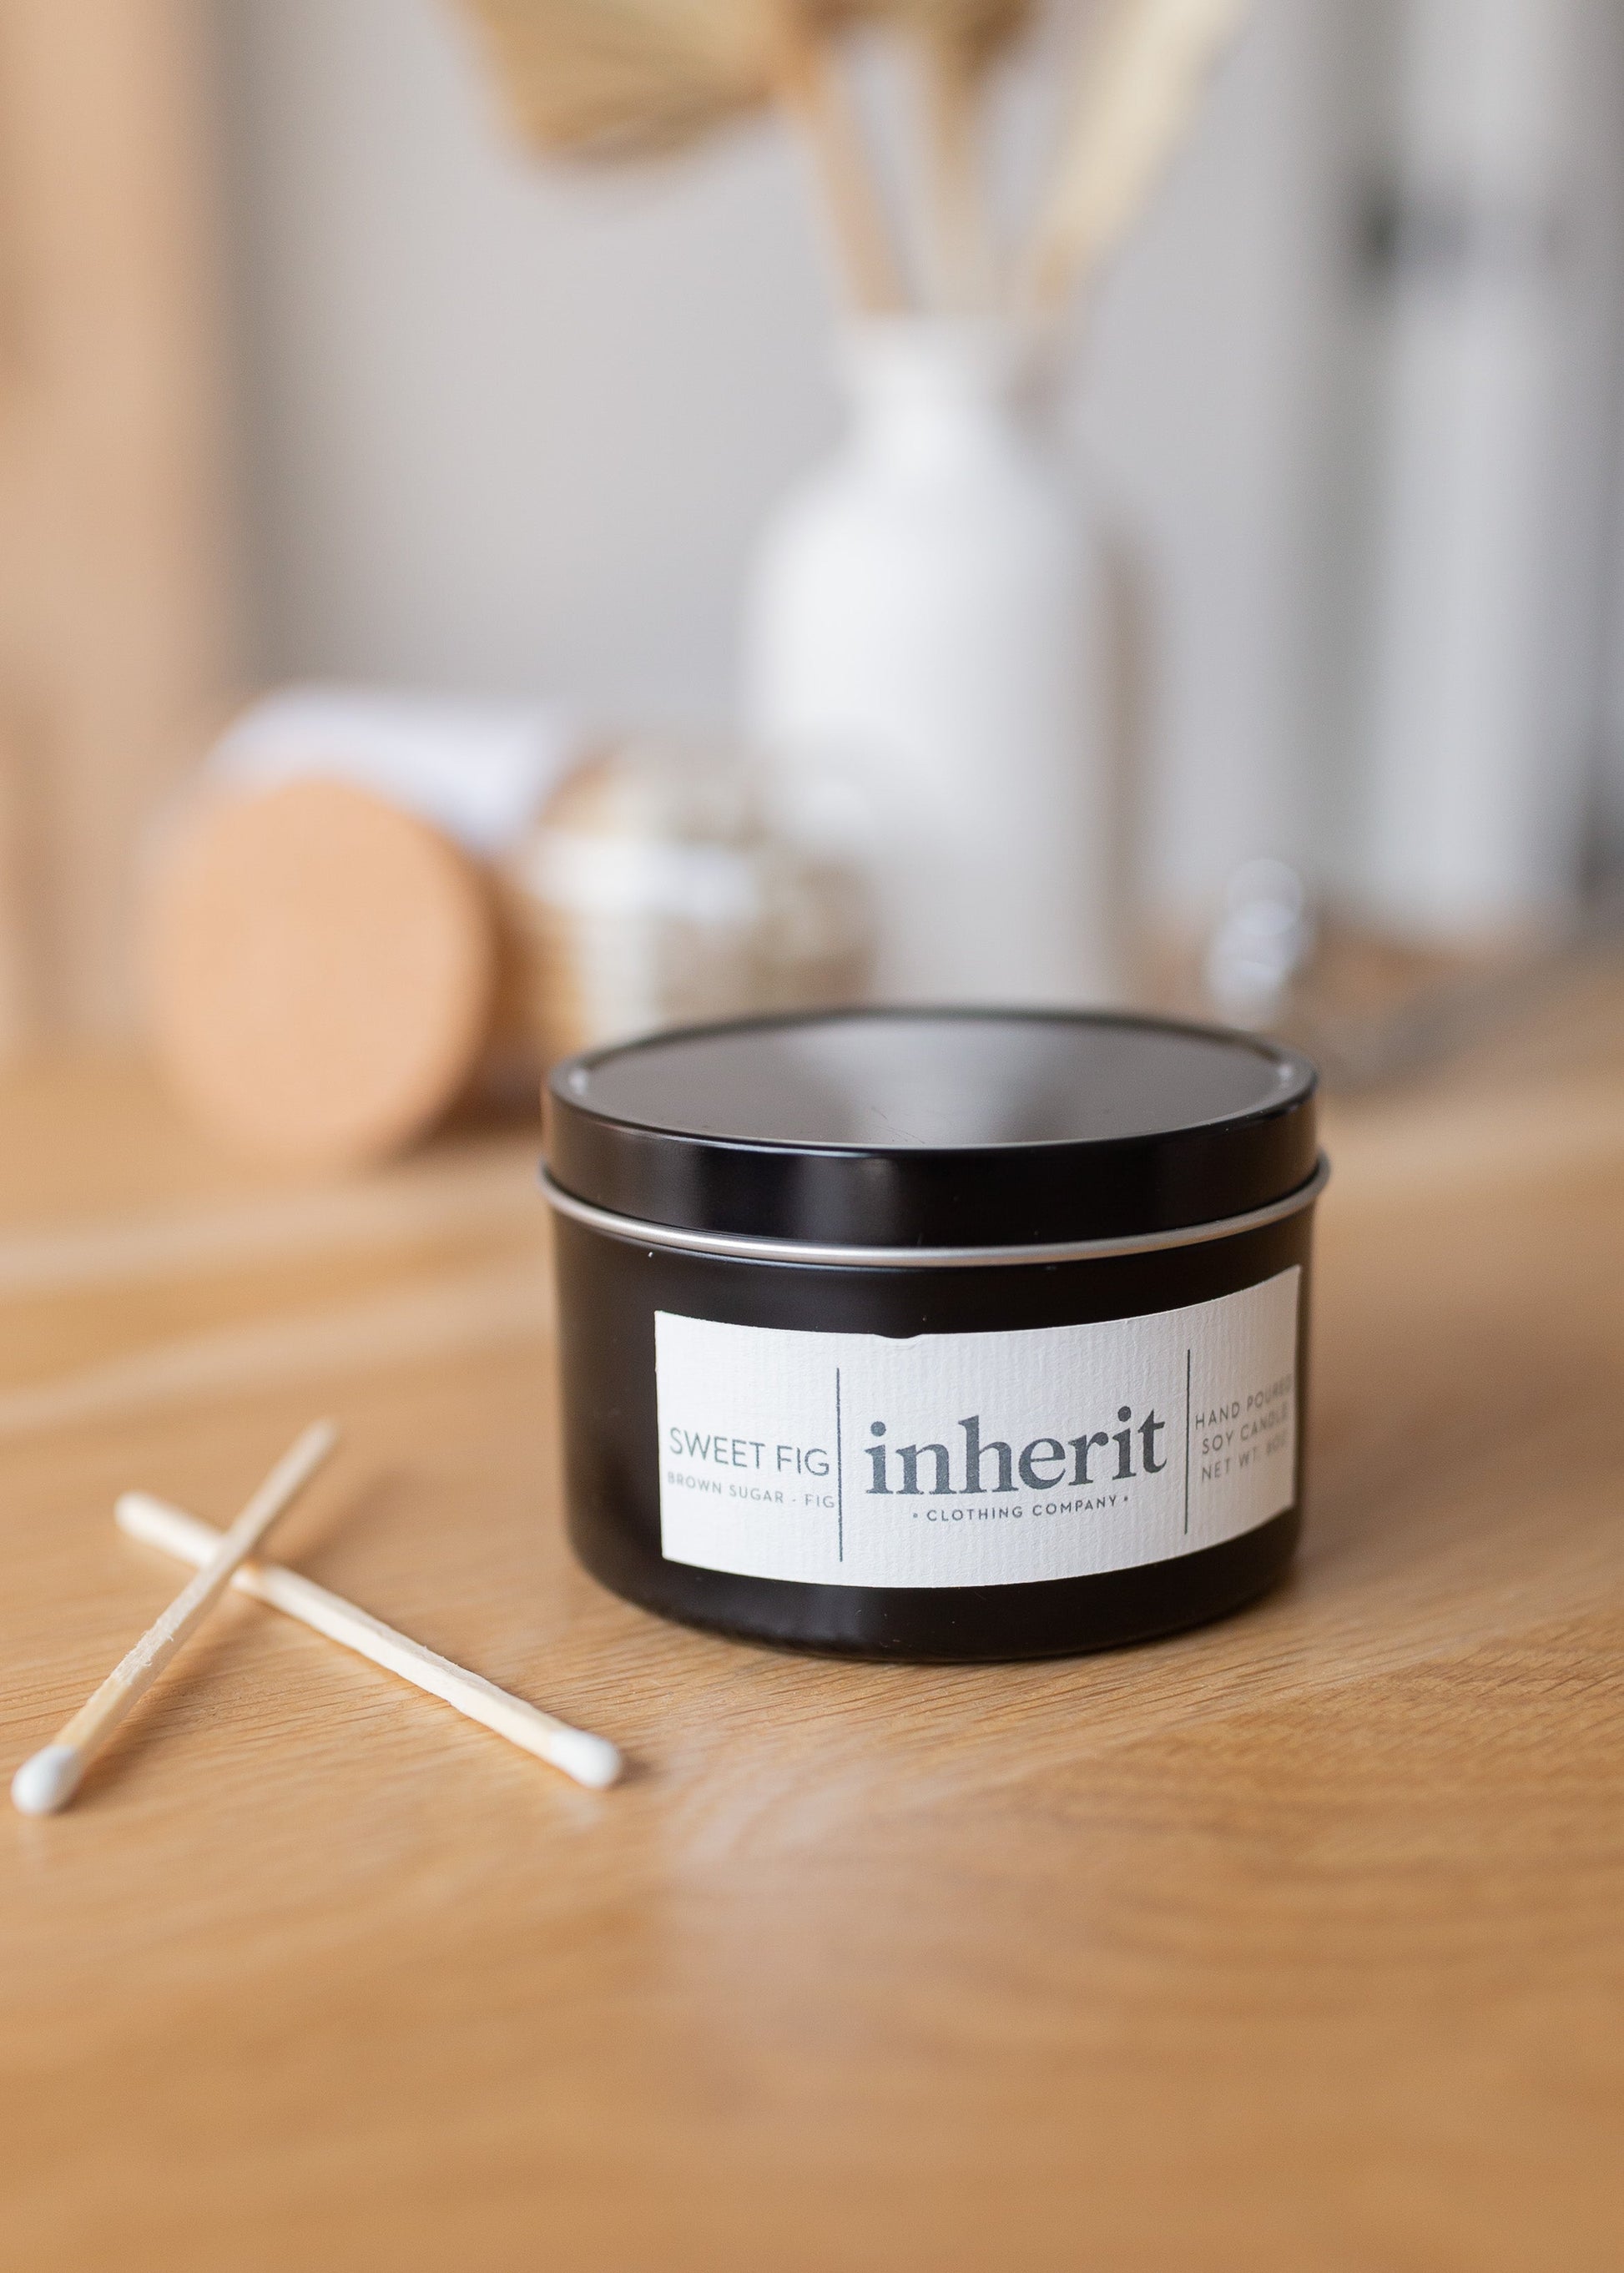 Inherit Fall Scented Soy Candle 4 oz. Gifts Sweet Fig